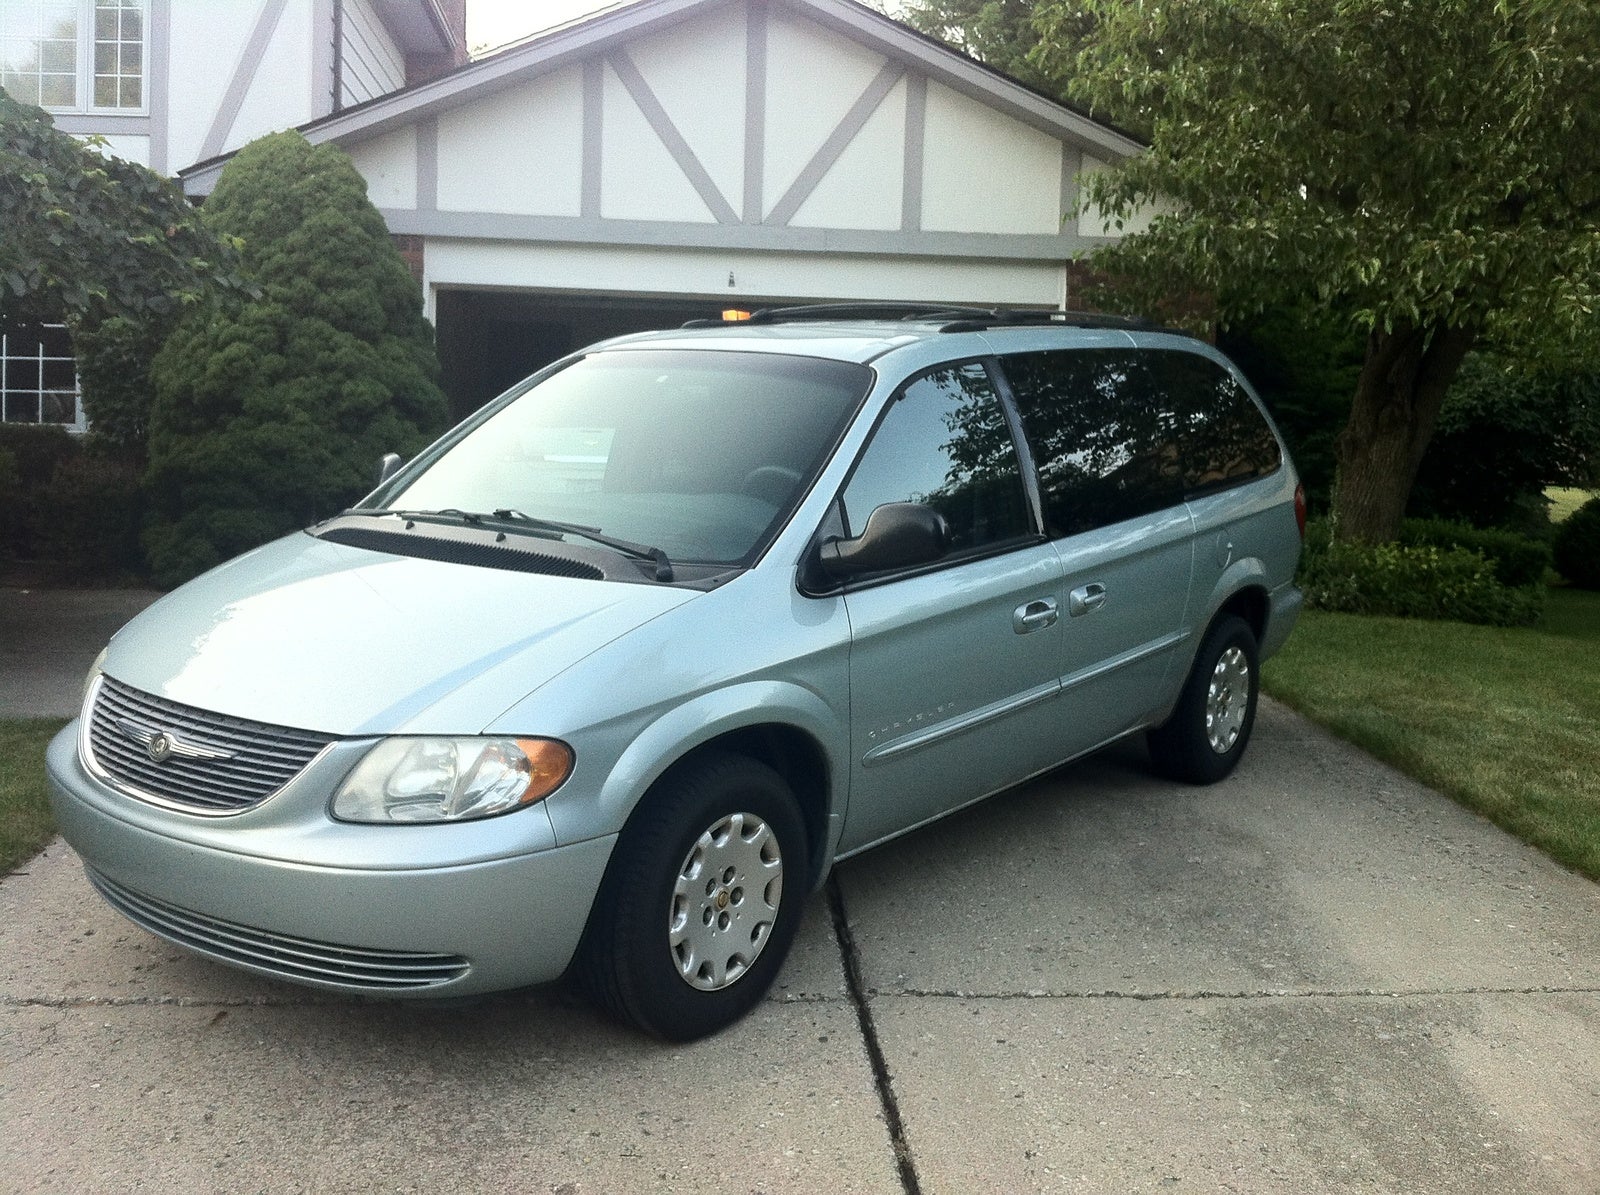 2001 Chrysler Town & Country Pictures CarGurus